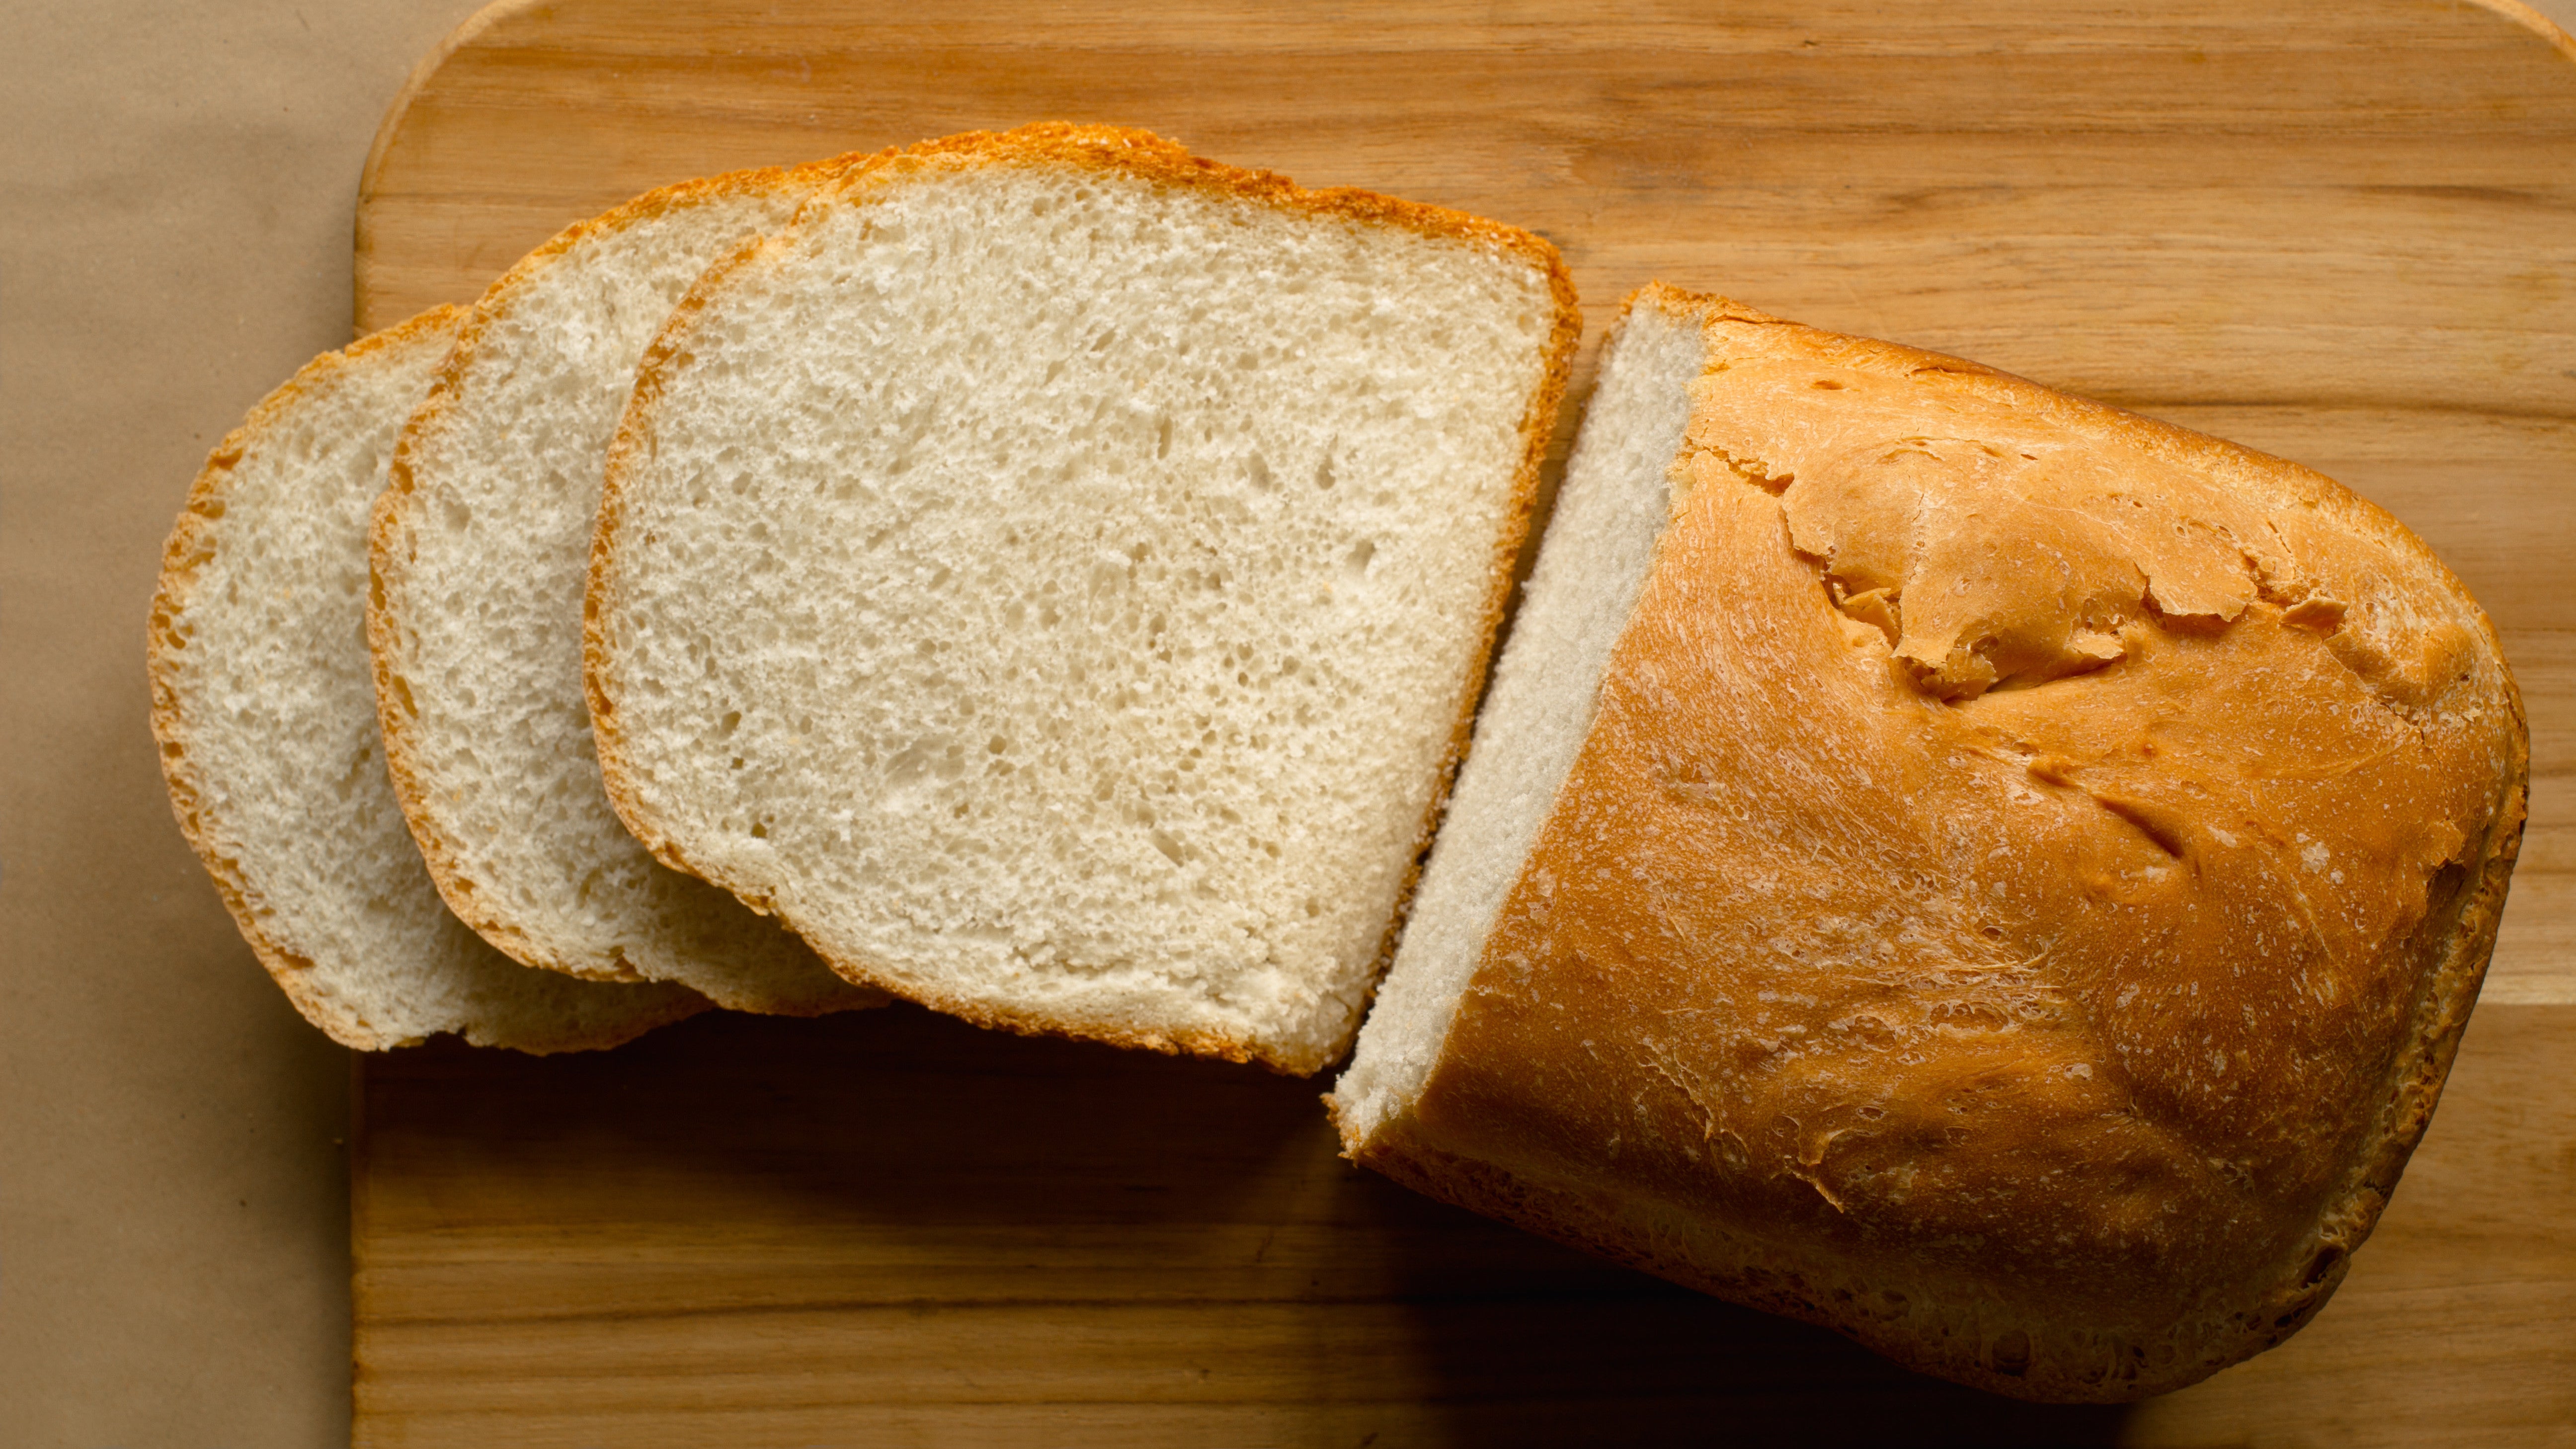 Sandwich Bread Is The Only Bread Worth Making Yourself